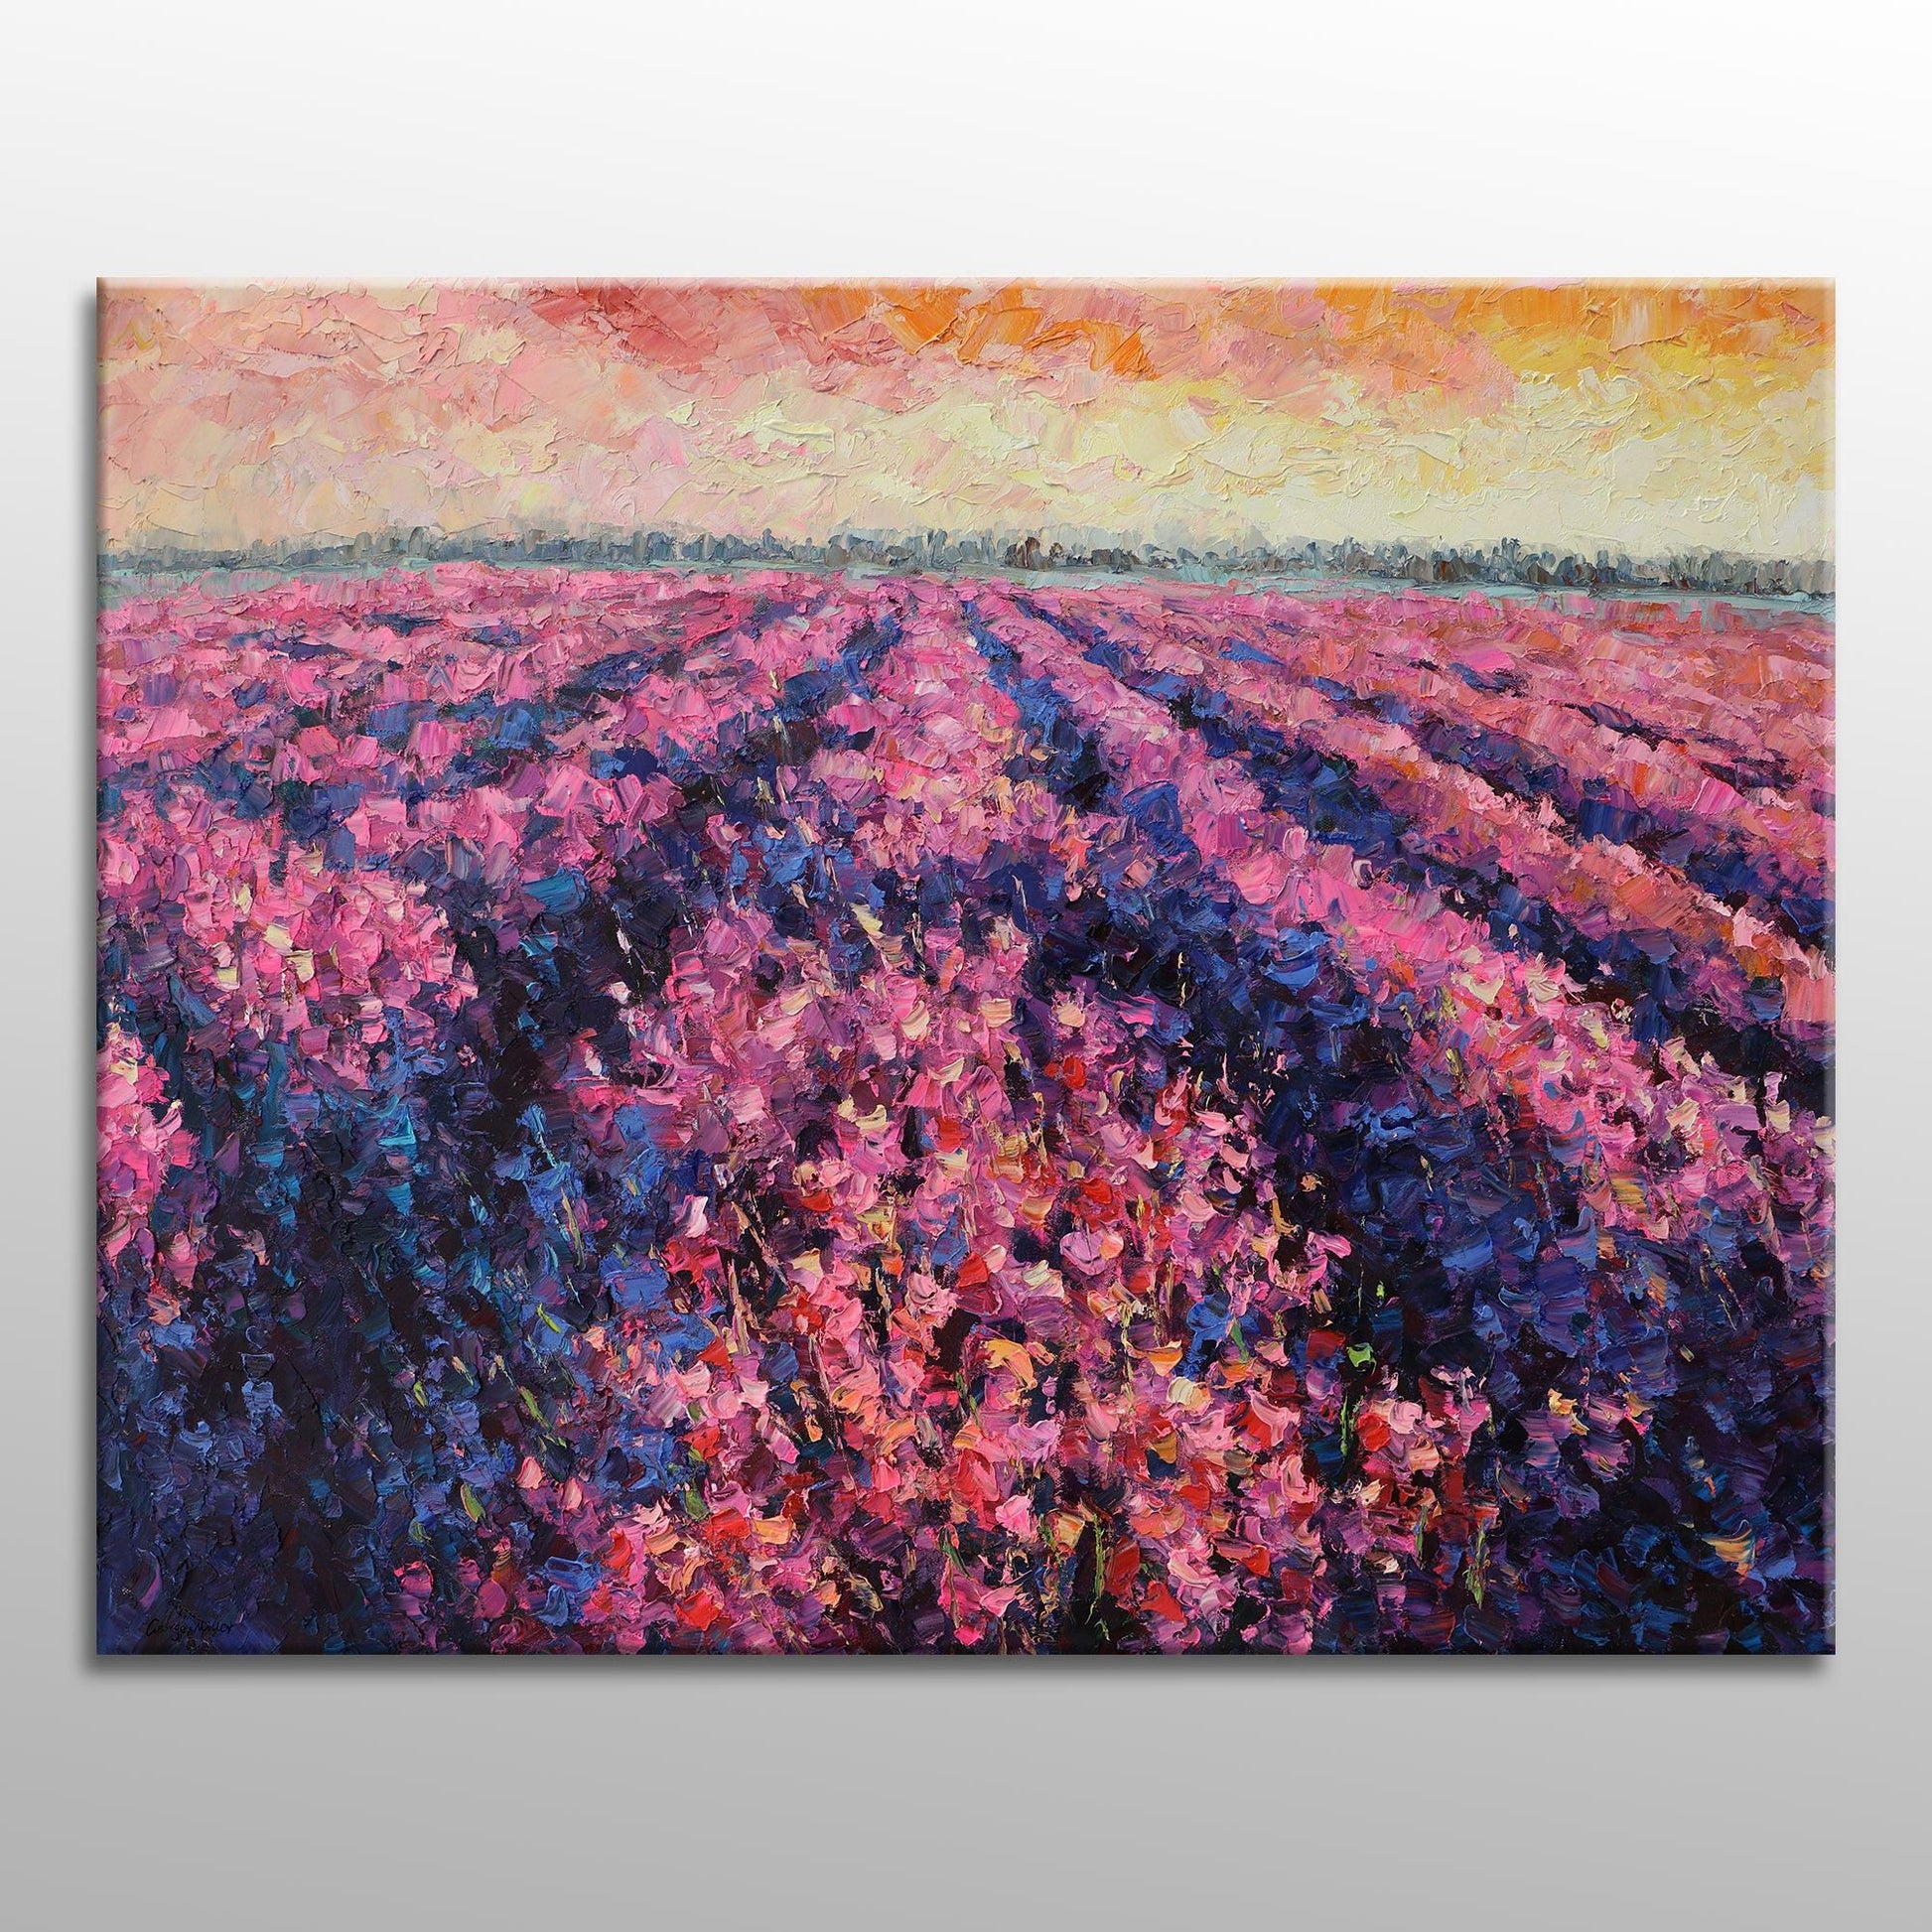 Large Oil Painting Provence Lavender Fields, Wall Decor, Abstract Canvas Painting, Landscape Painting, Landscape Painting, Living Room Art